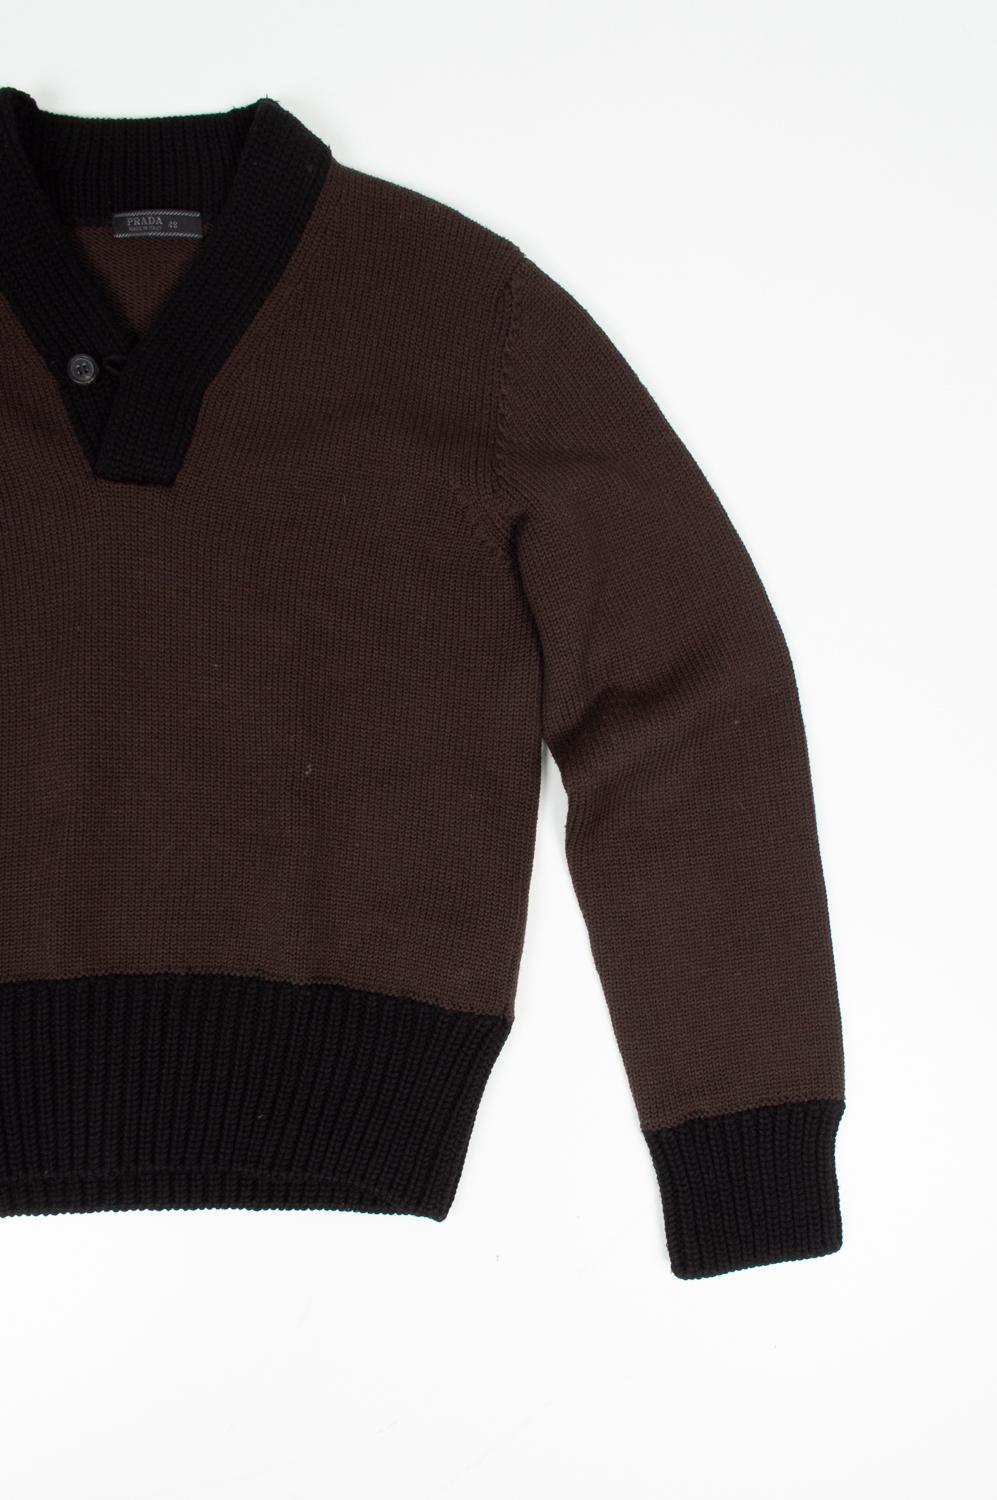 100% genuine Prada Wool Knit Heavy Sweater, S582
Color: Brown with black parts
(An actual color may a bit vary due to individual computer screen interpretation)
Material: Wool
Tag size: 48ITA runs Medium
This sweater is great quality item. Rate 9 of